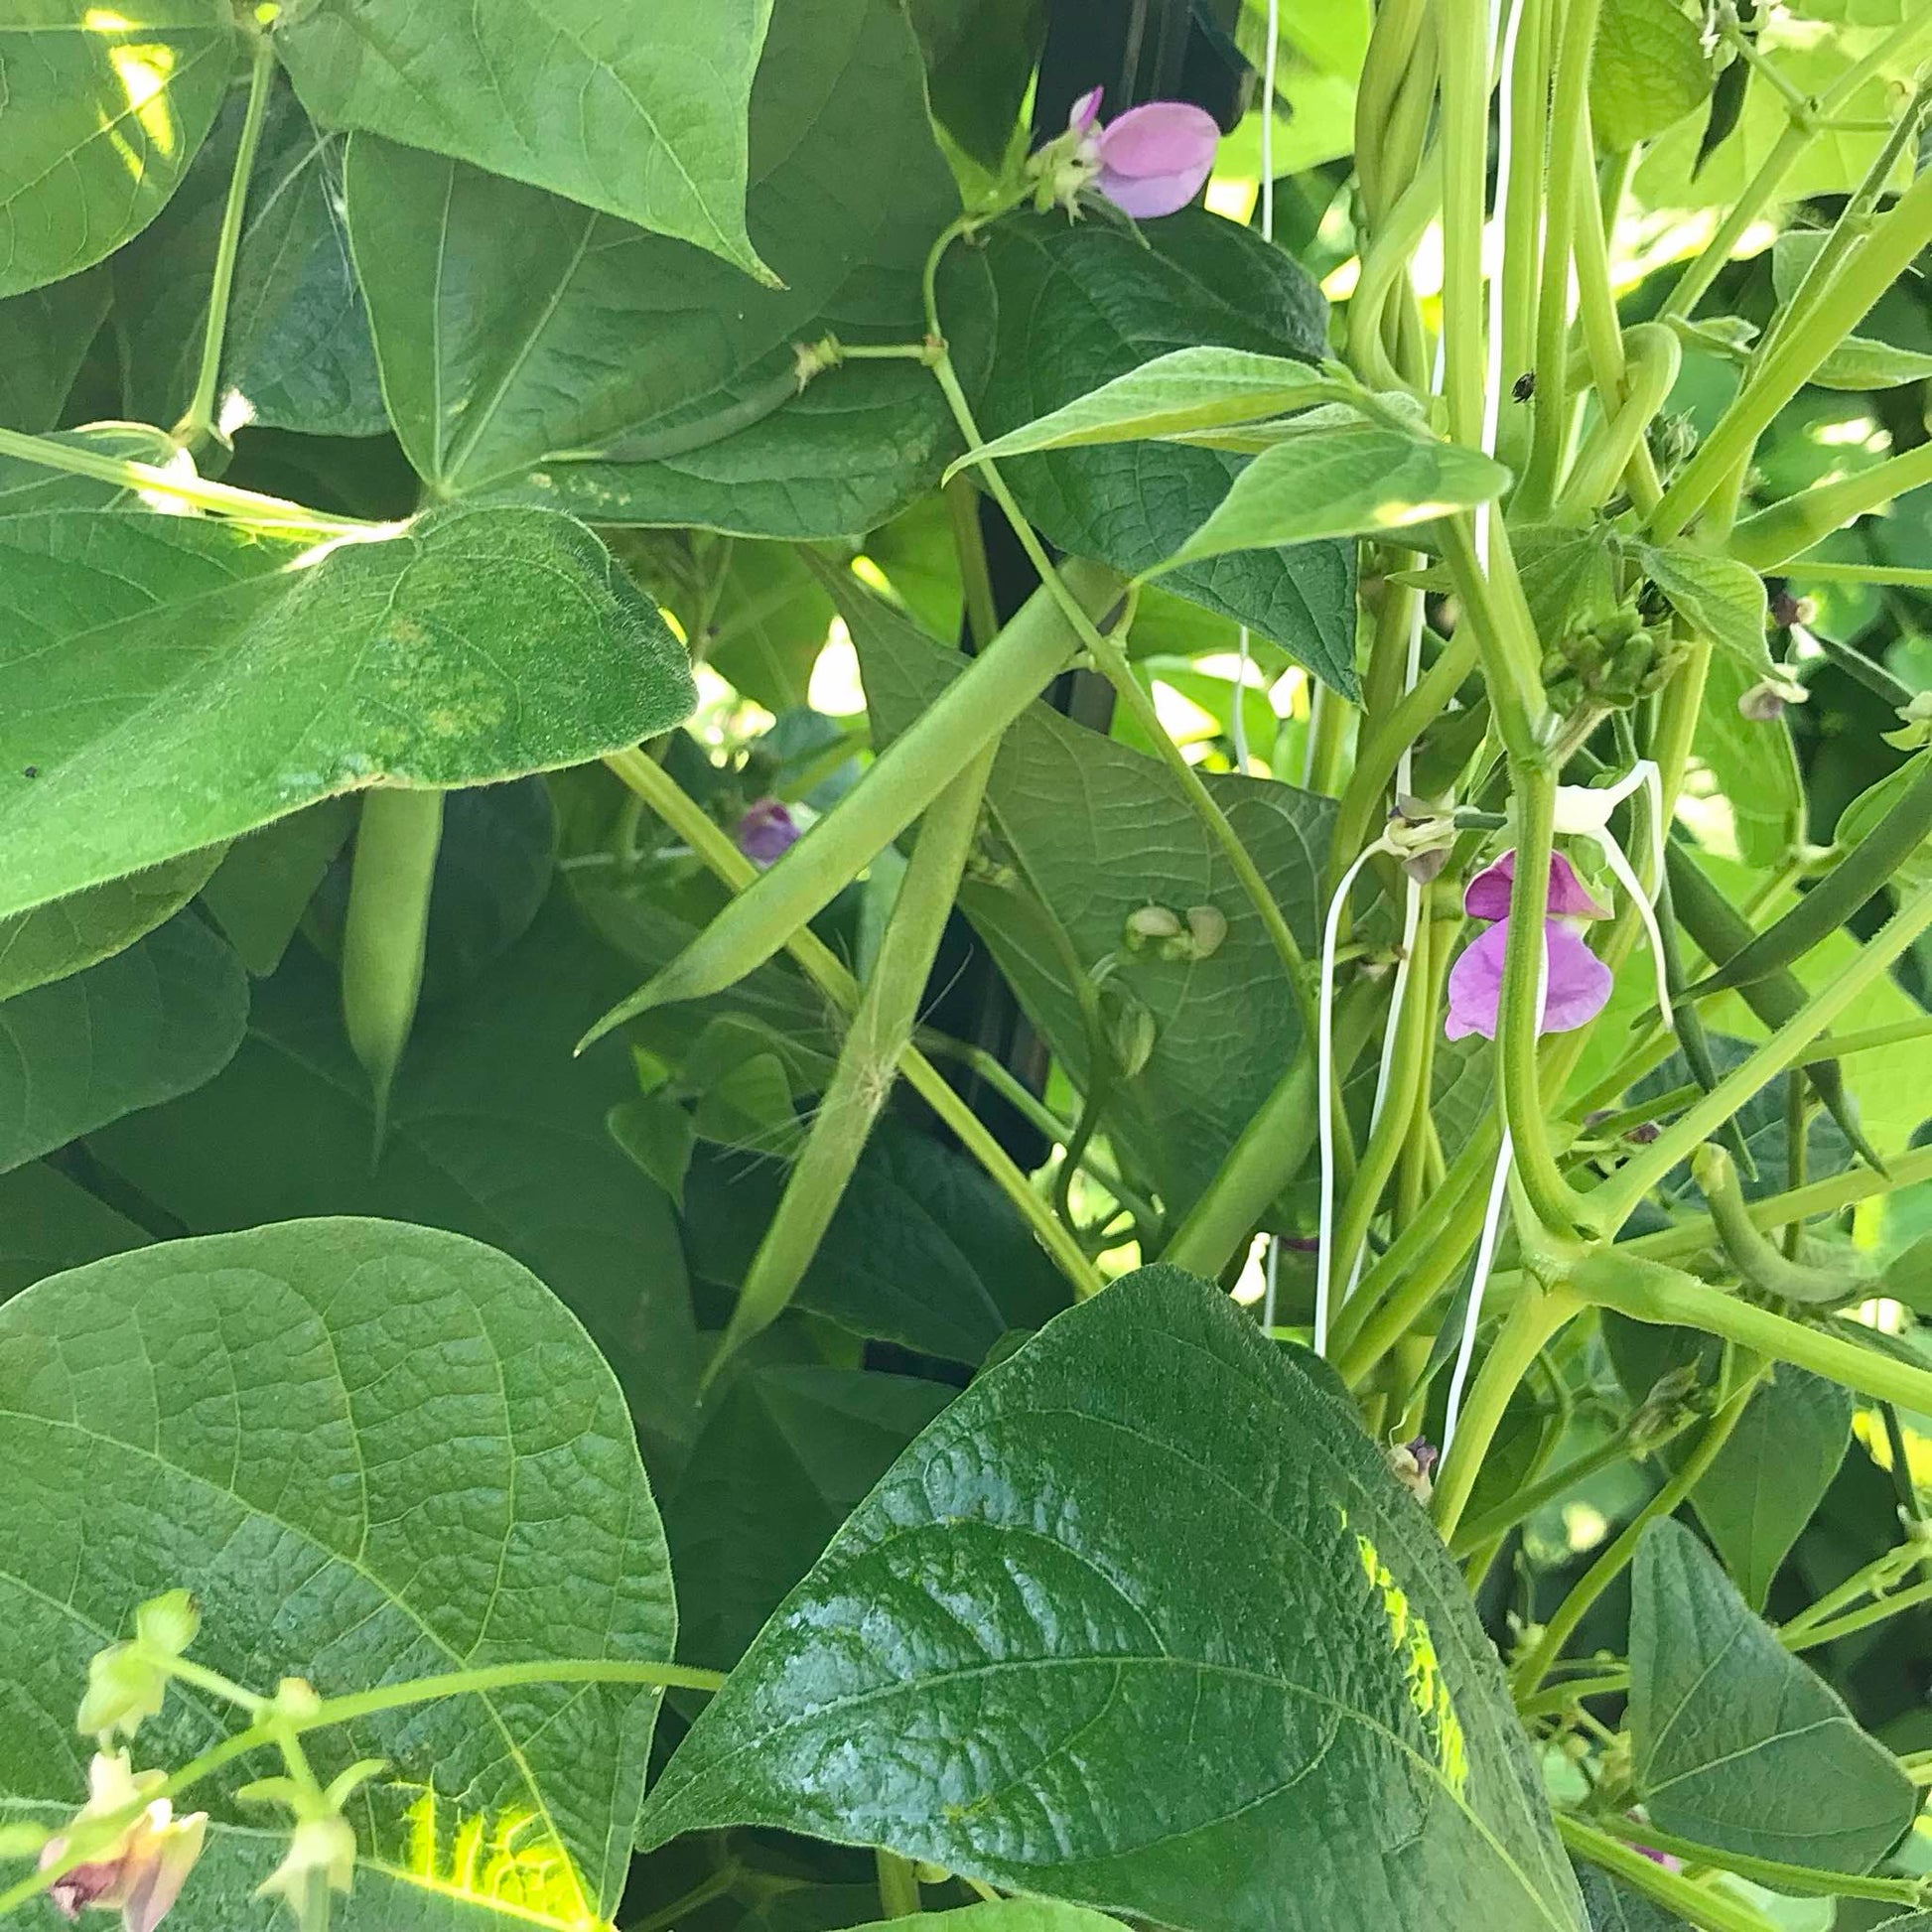 Pole bean pods and pink flowers on leafy vines.